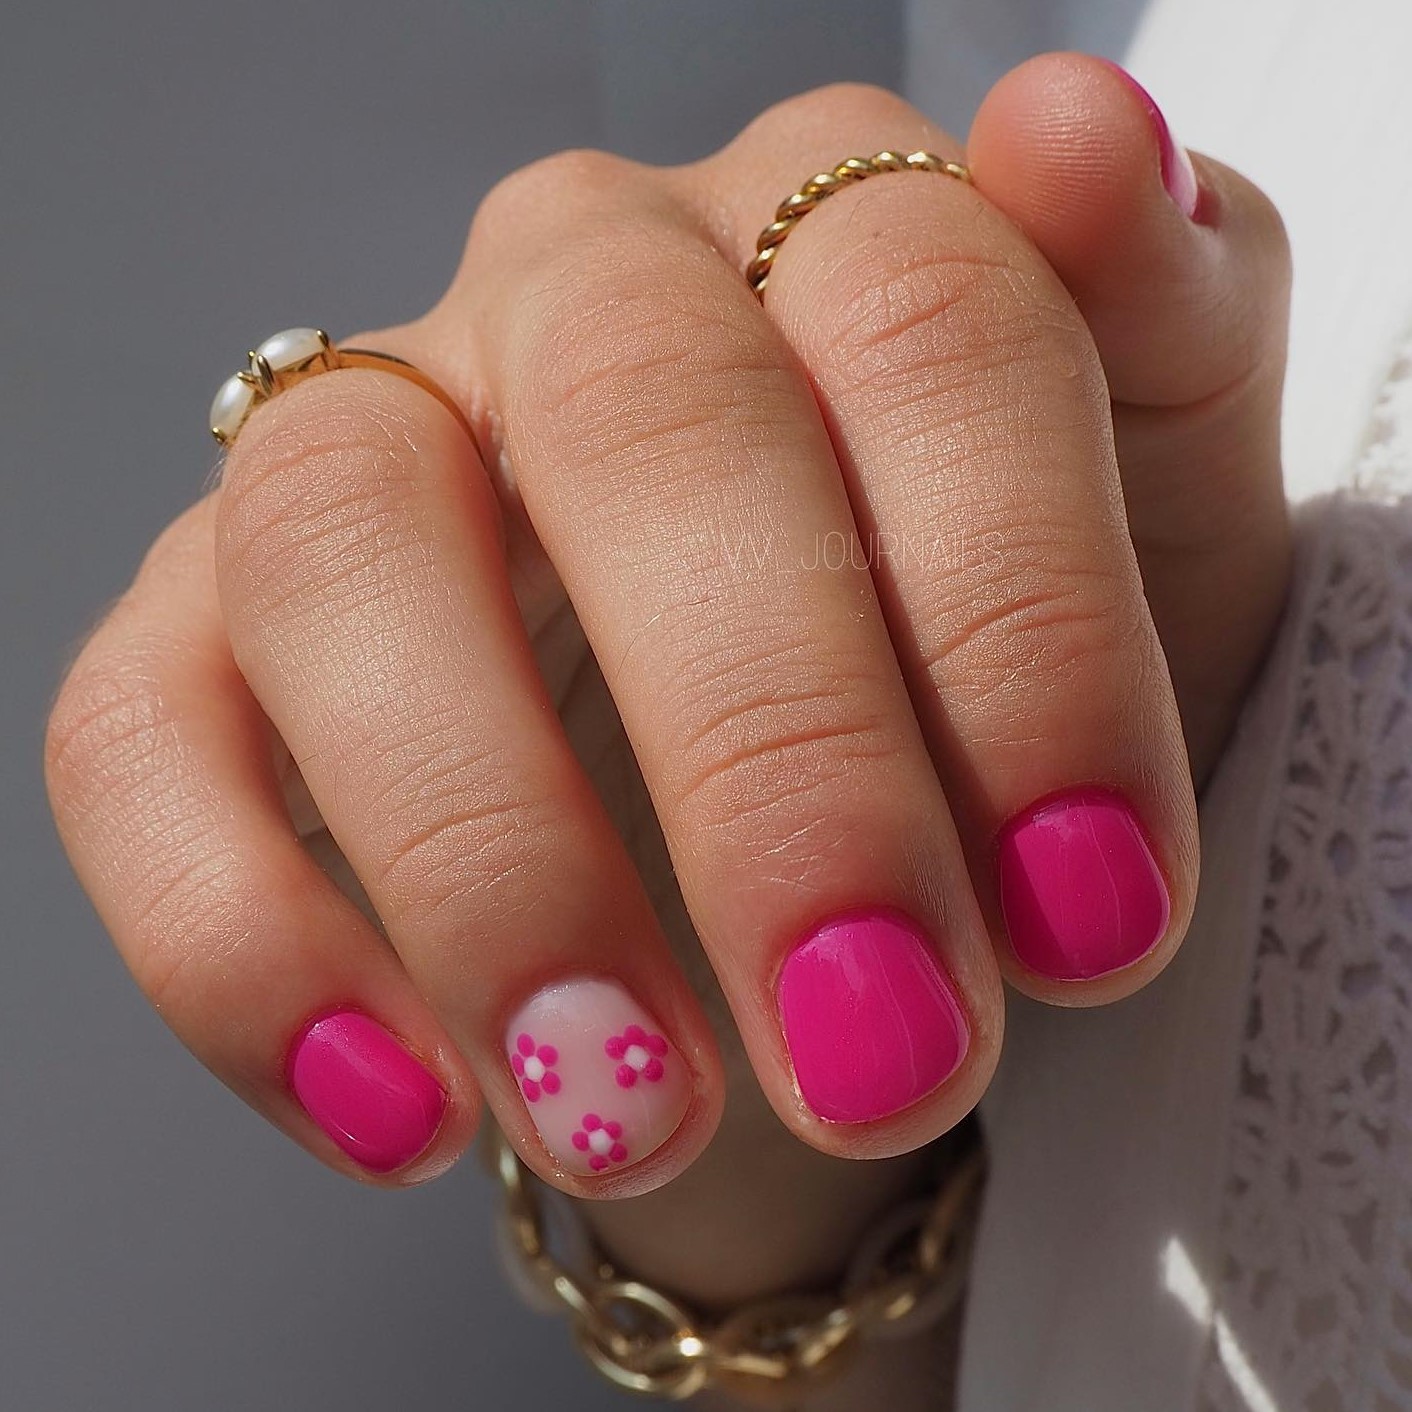 Pretty-in-Pink Nail Designs with Mylee's Limited Edition Duo – Mylee